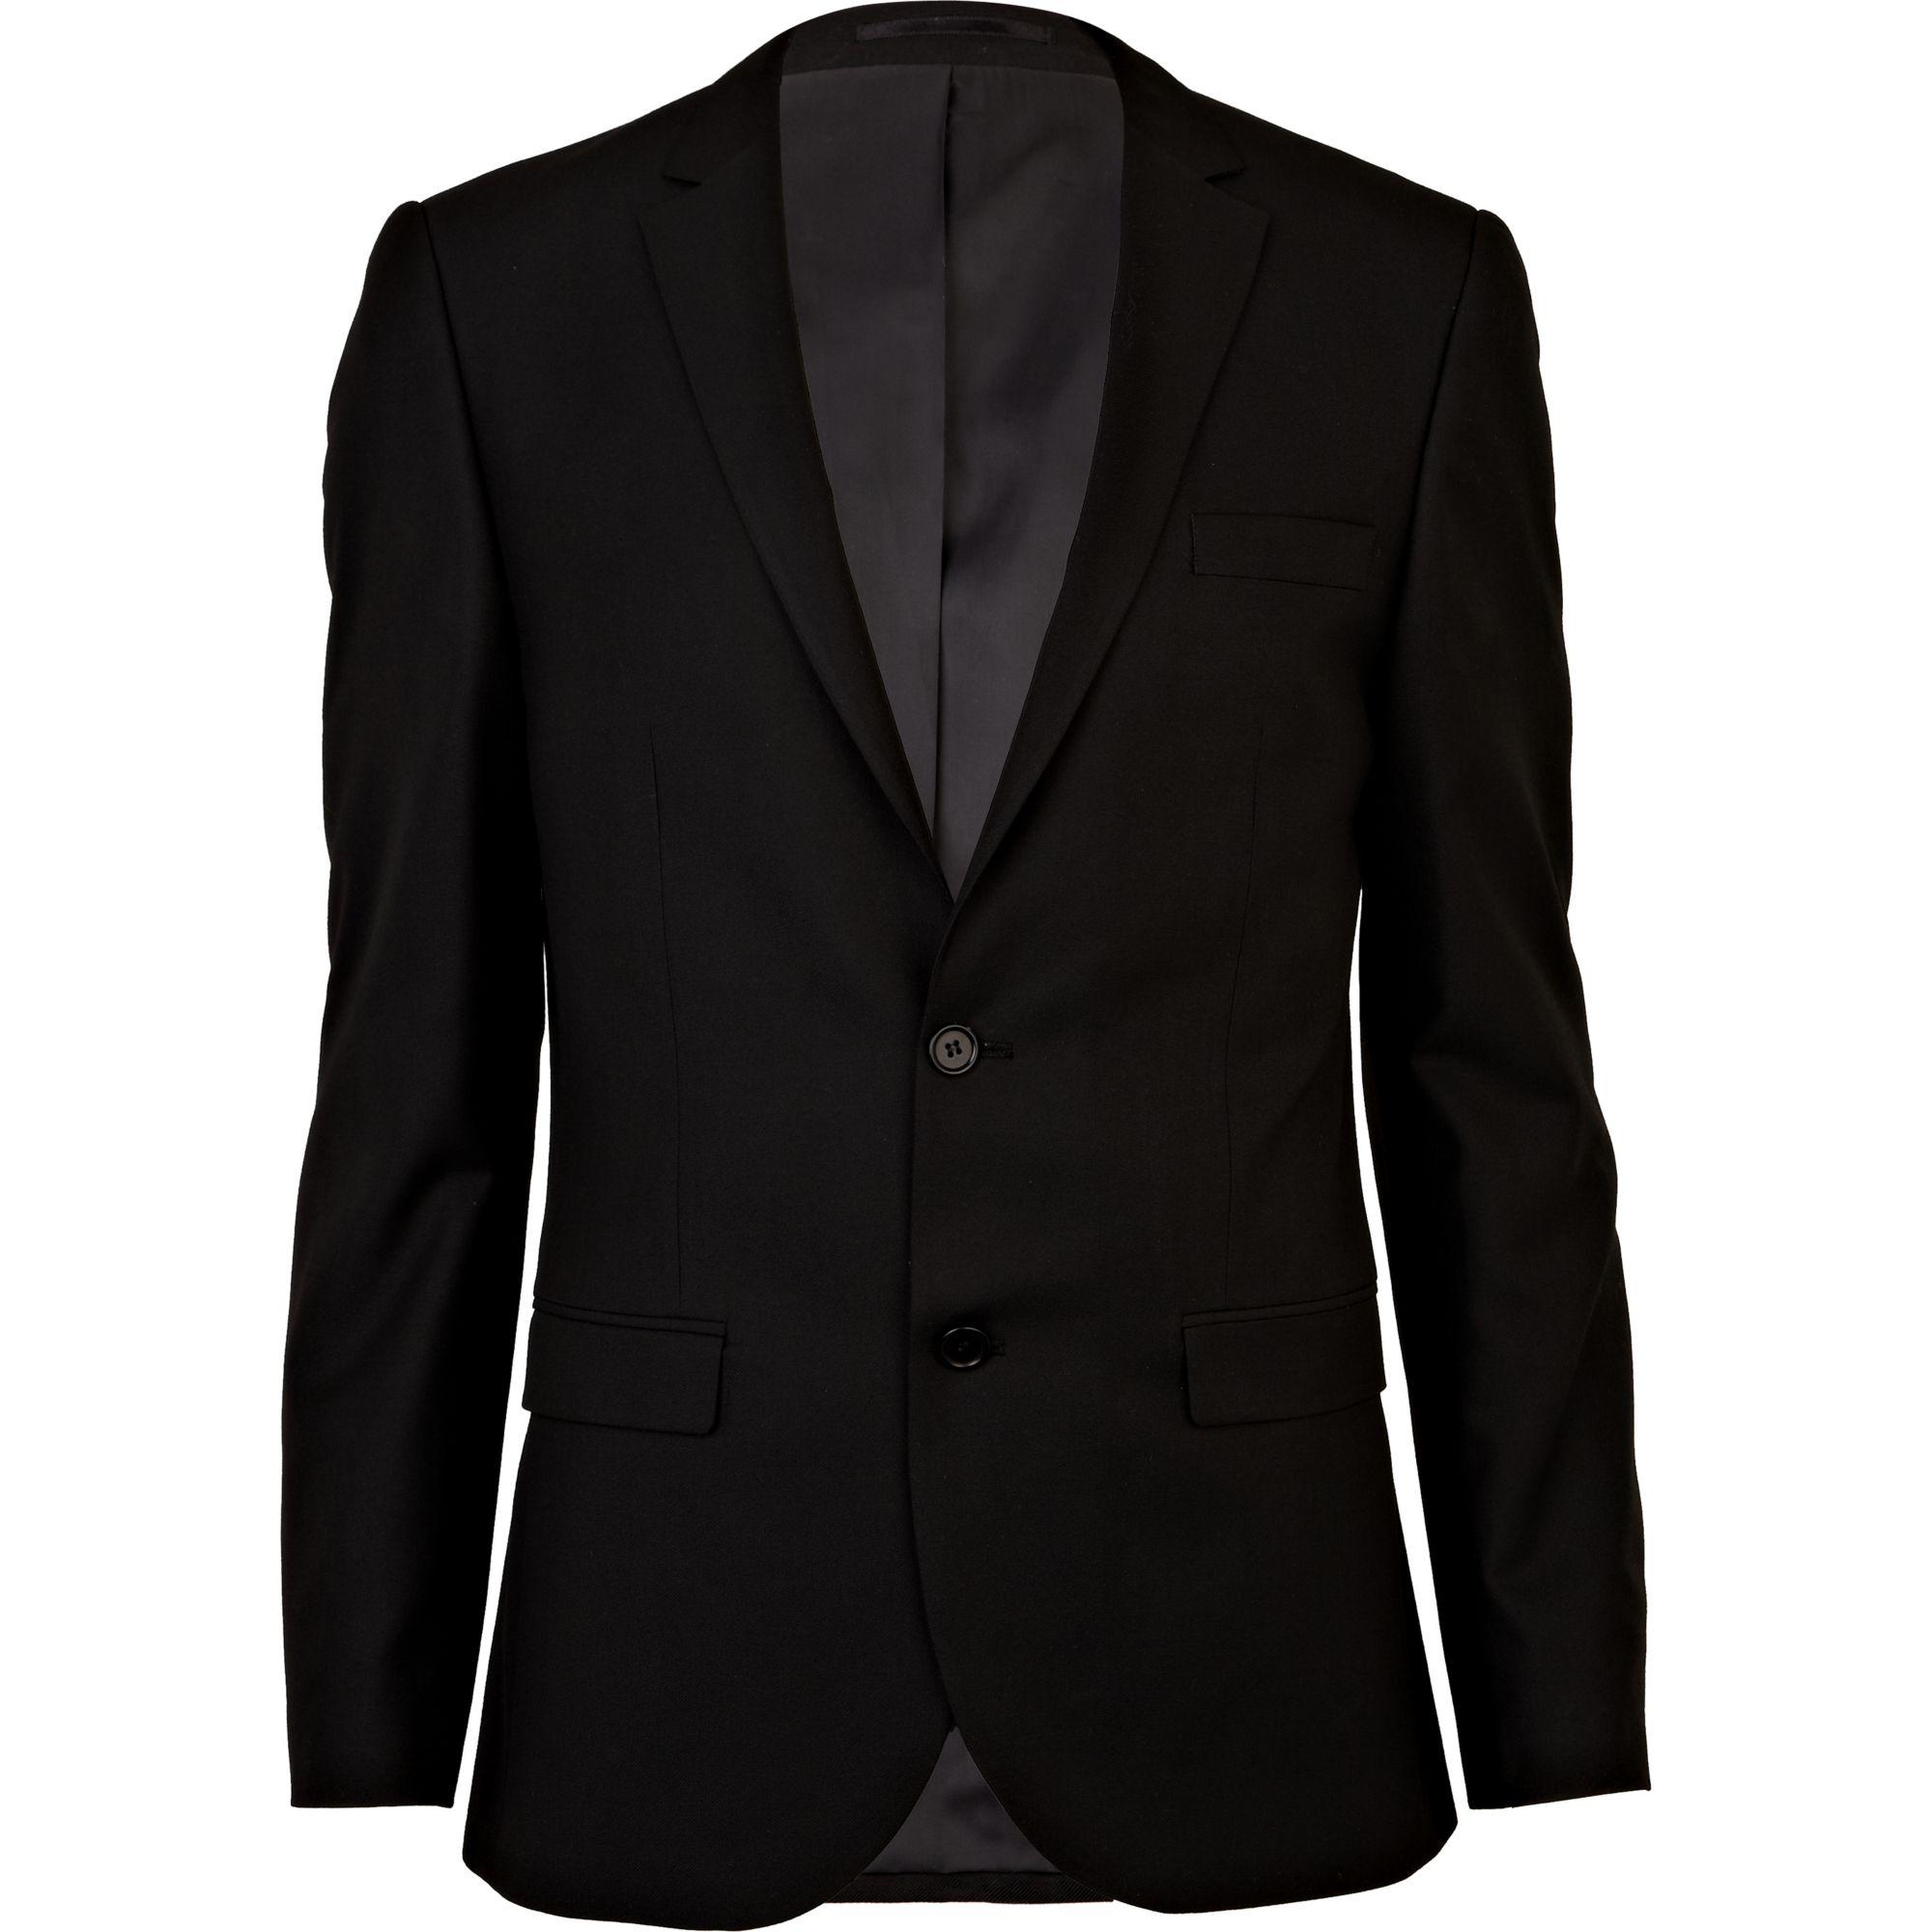 River Island Synthetic Slim Suit Jacket in Black for Men - Lyst